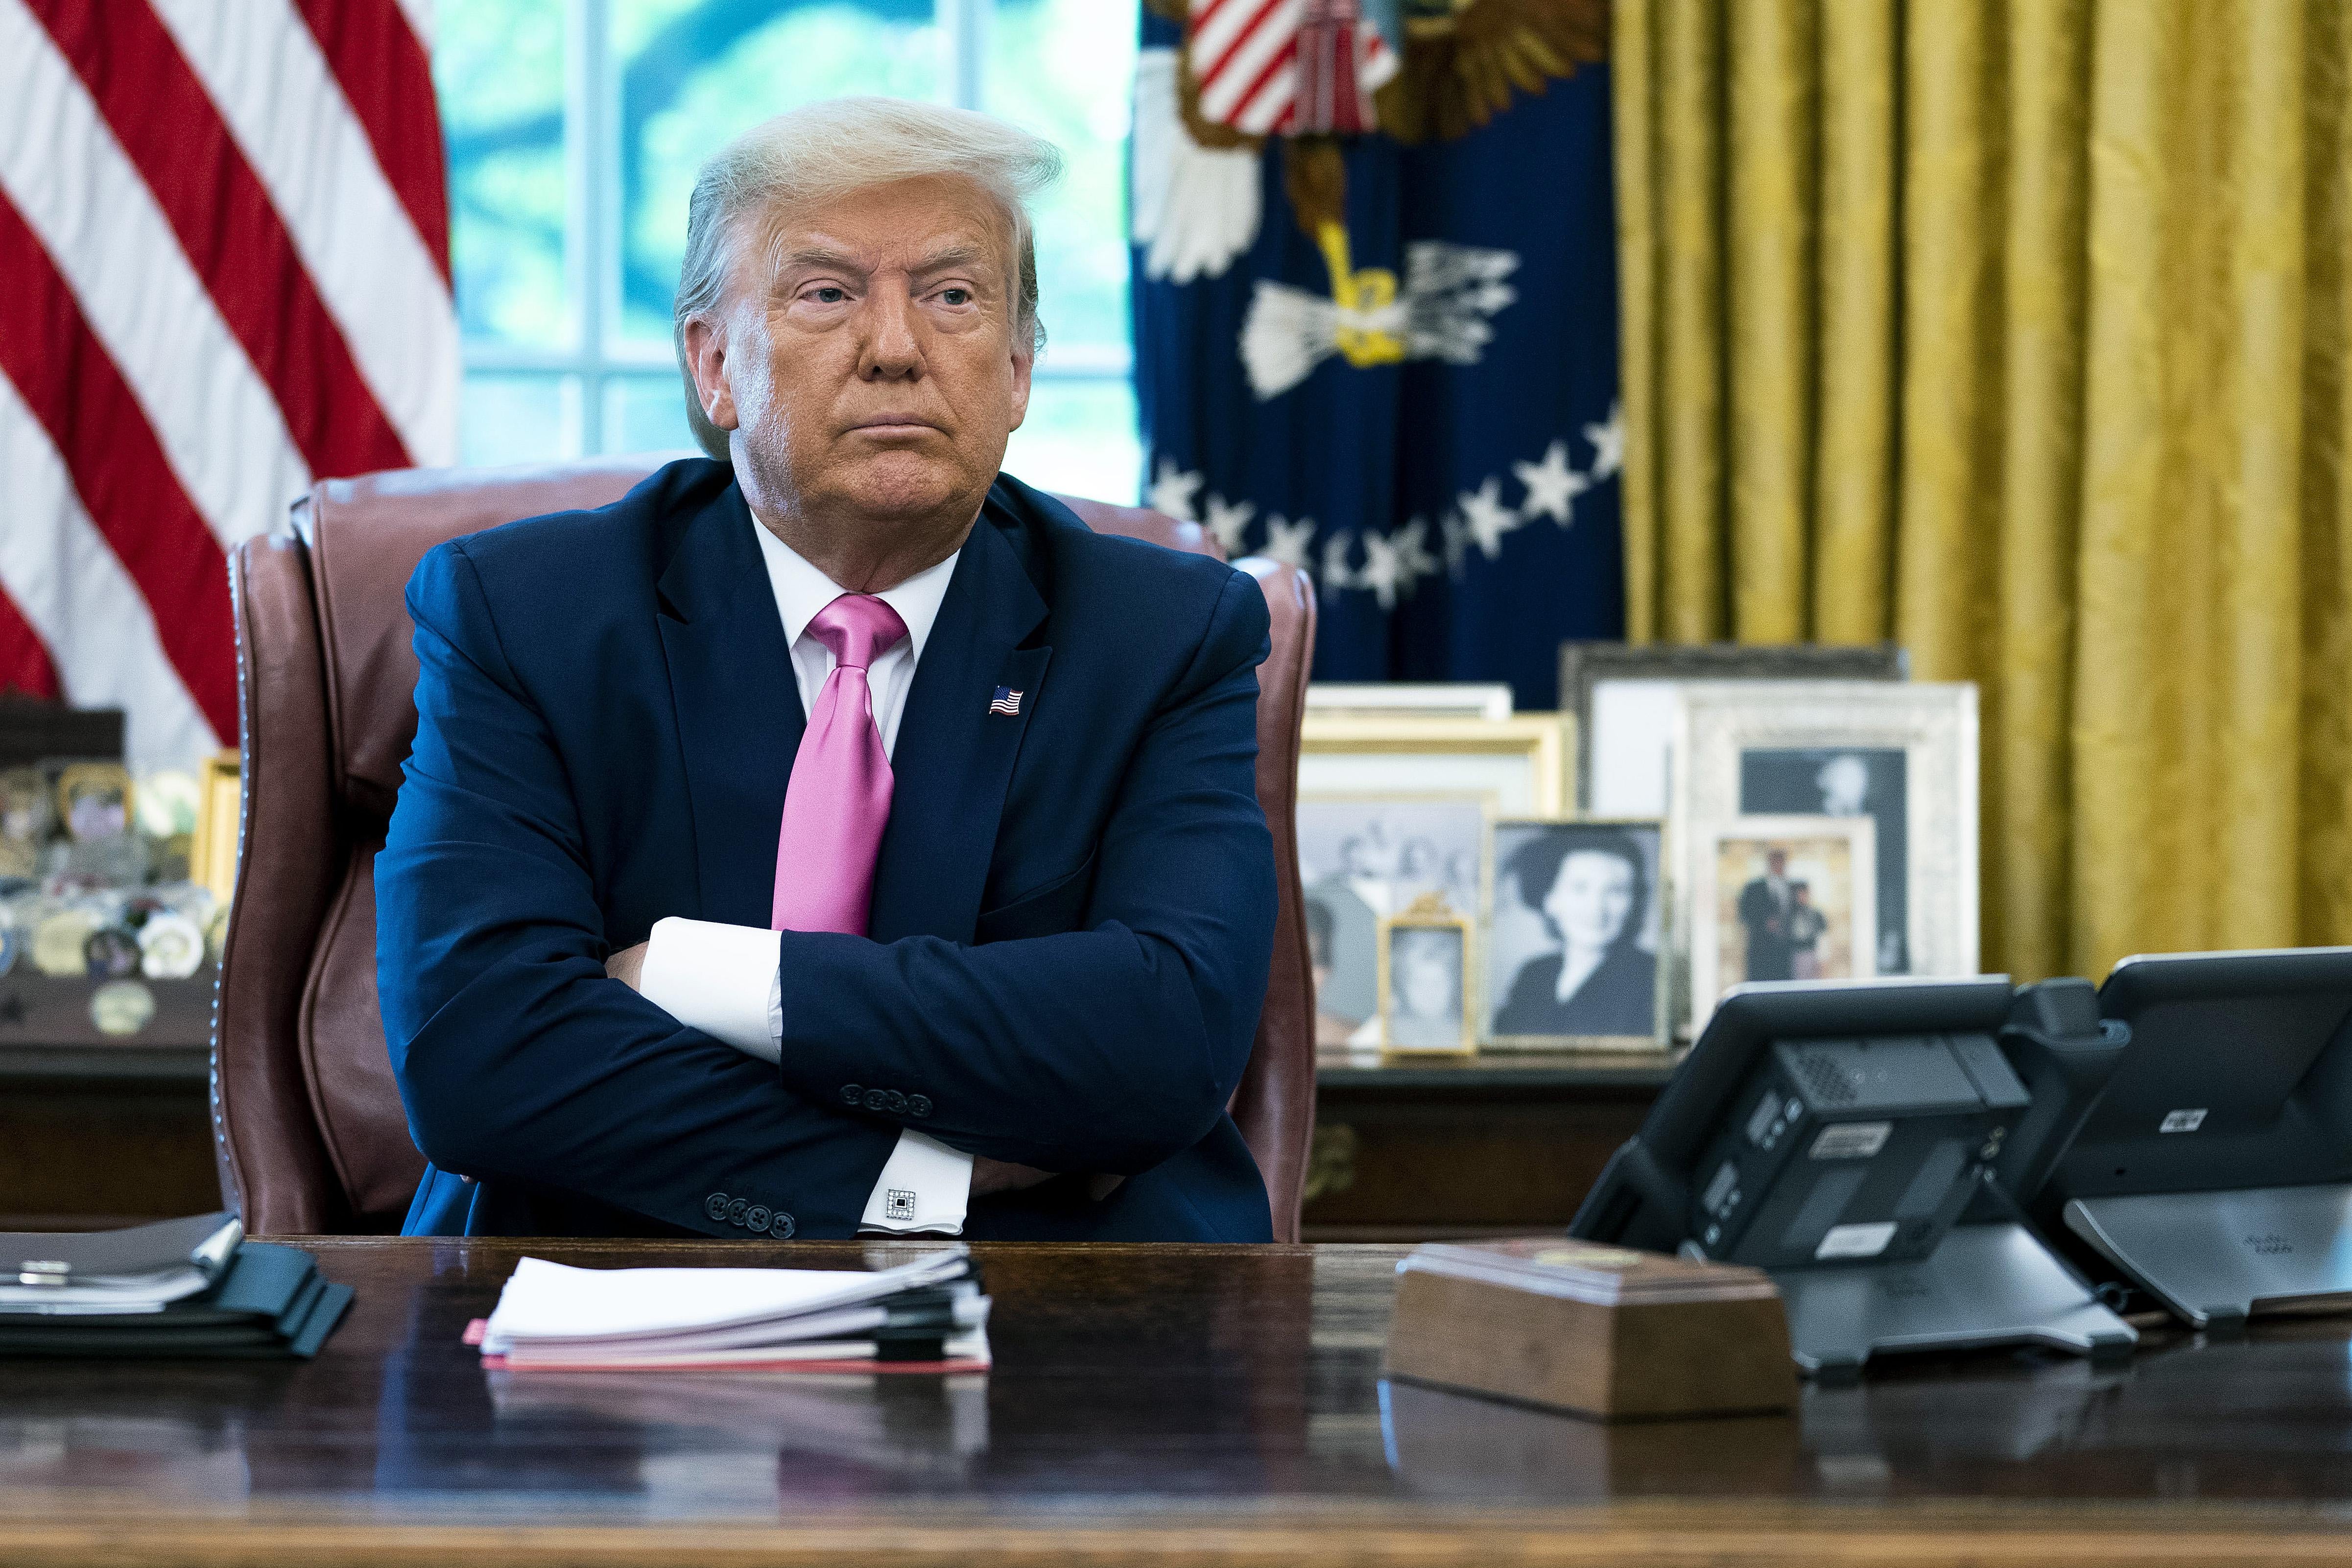 Trump sits with his arms crossed at the Resolute Desk